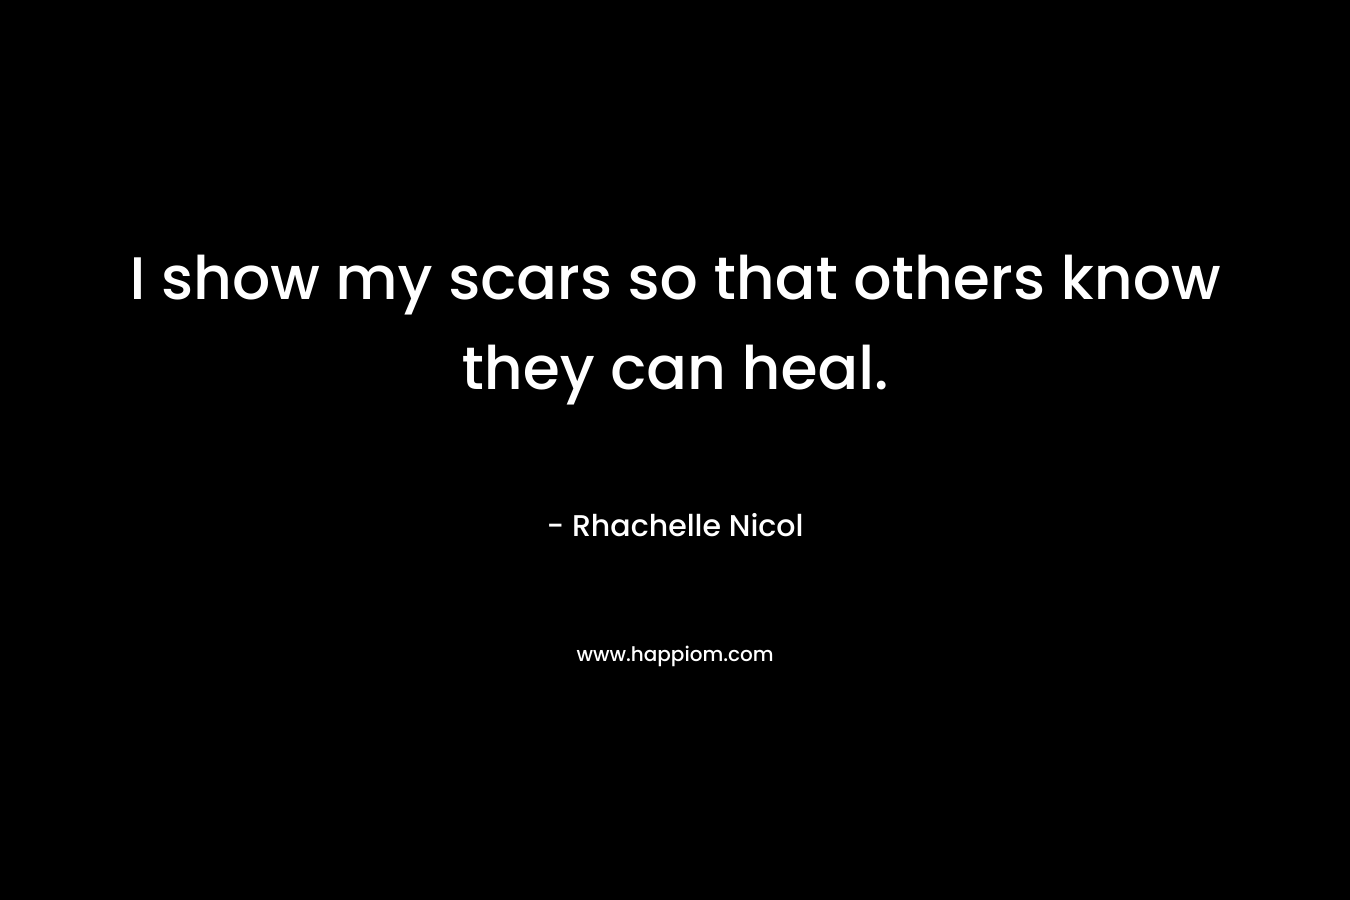 I show my scars so that others know they can heal.